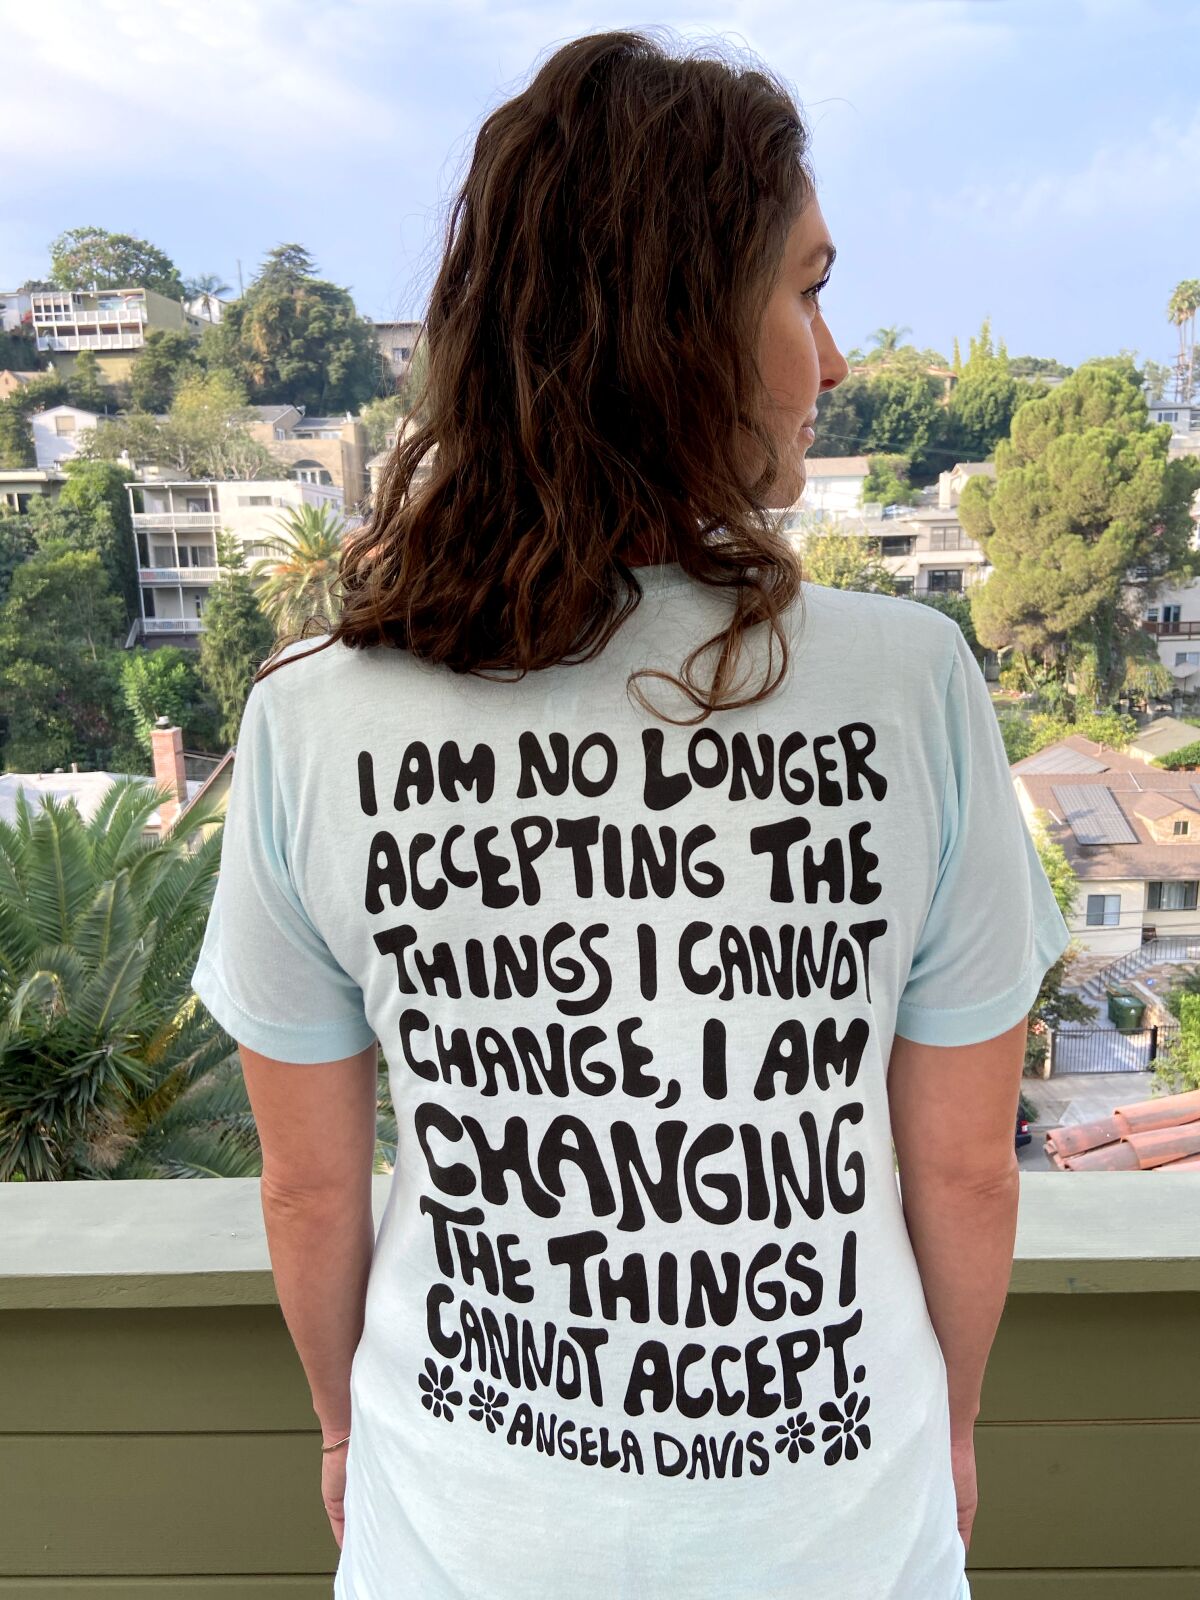 Artist Laurie Berger in her T-shirt from Power to the Ballot.